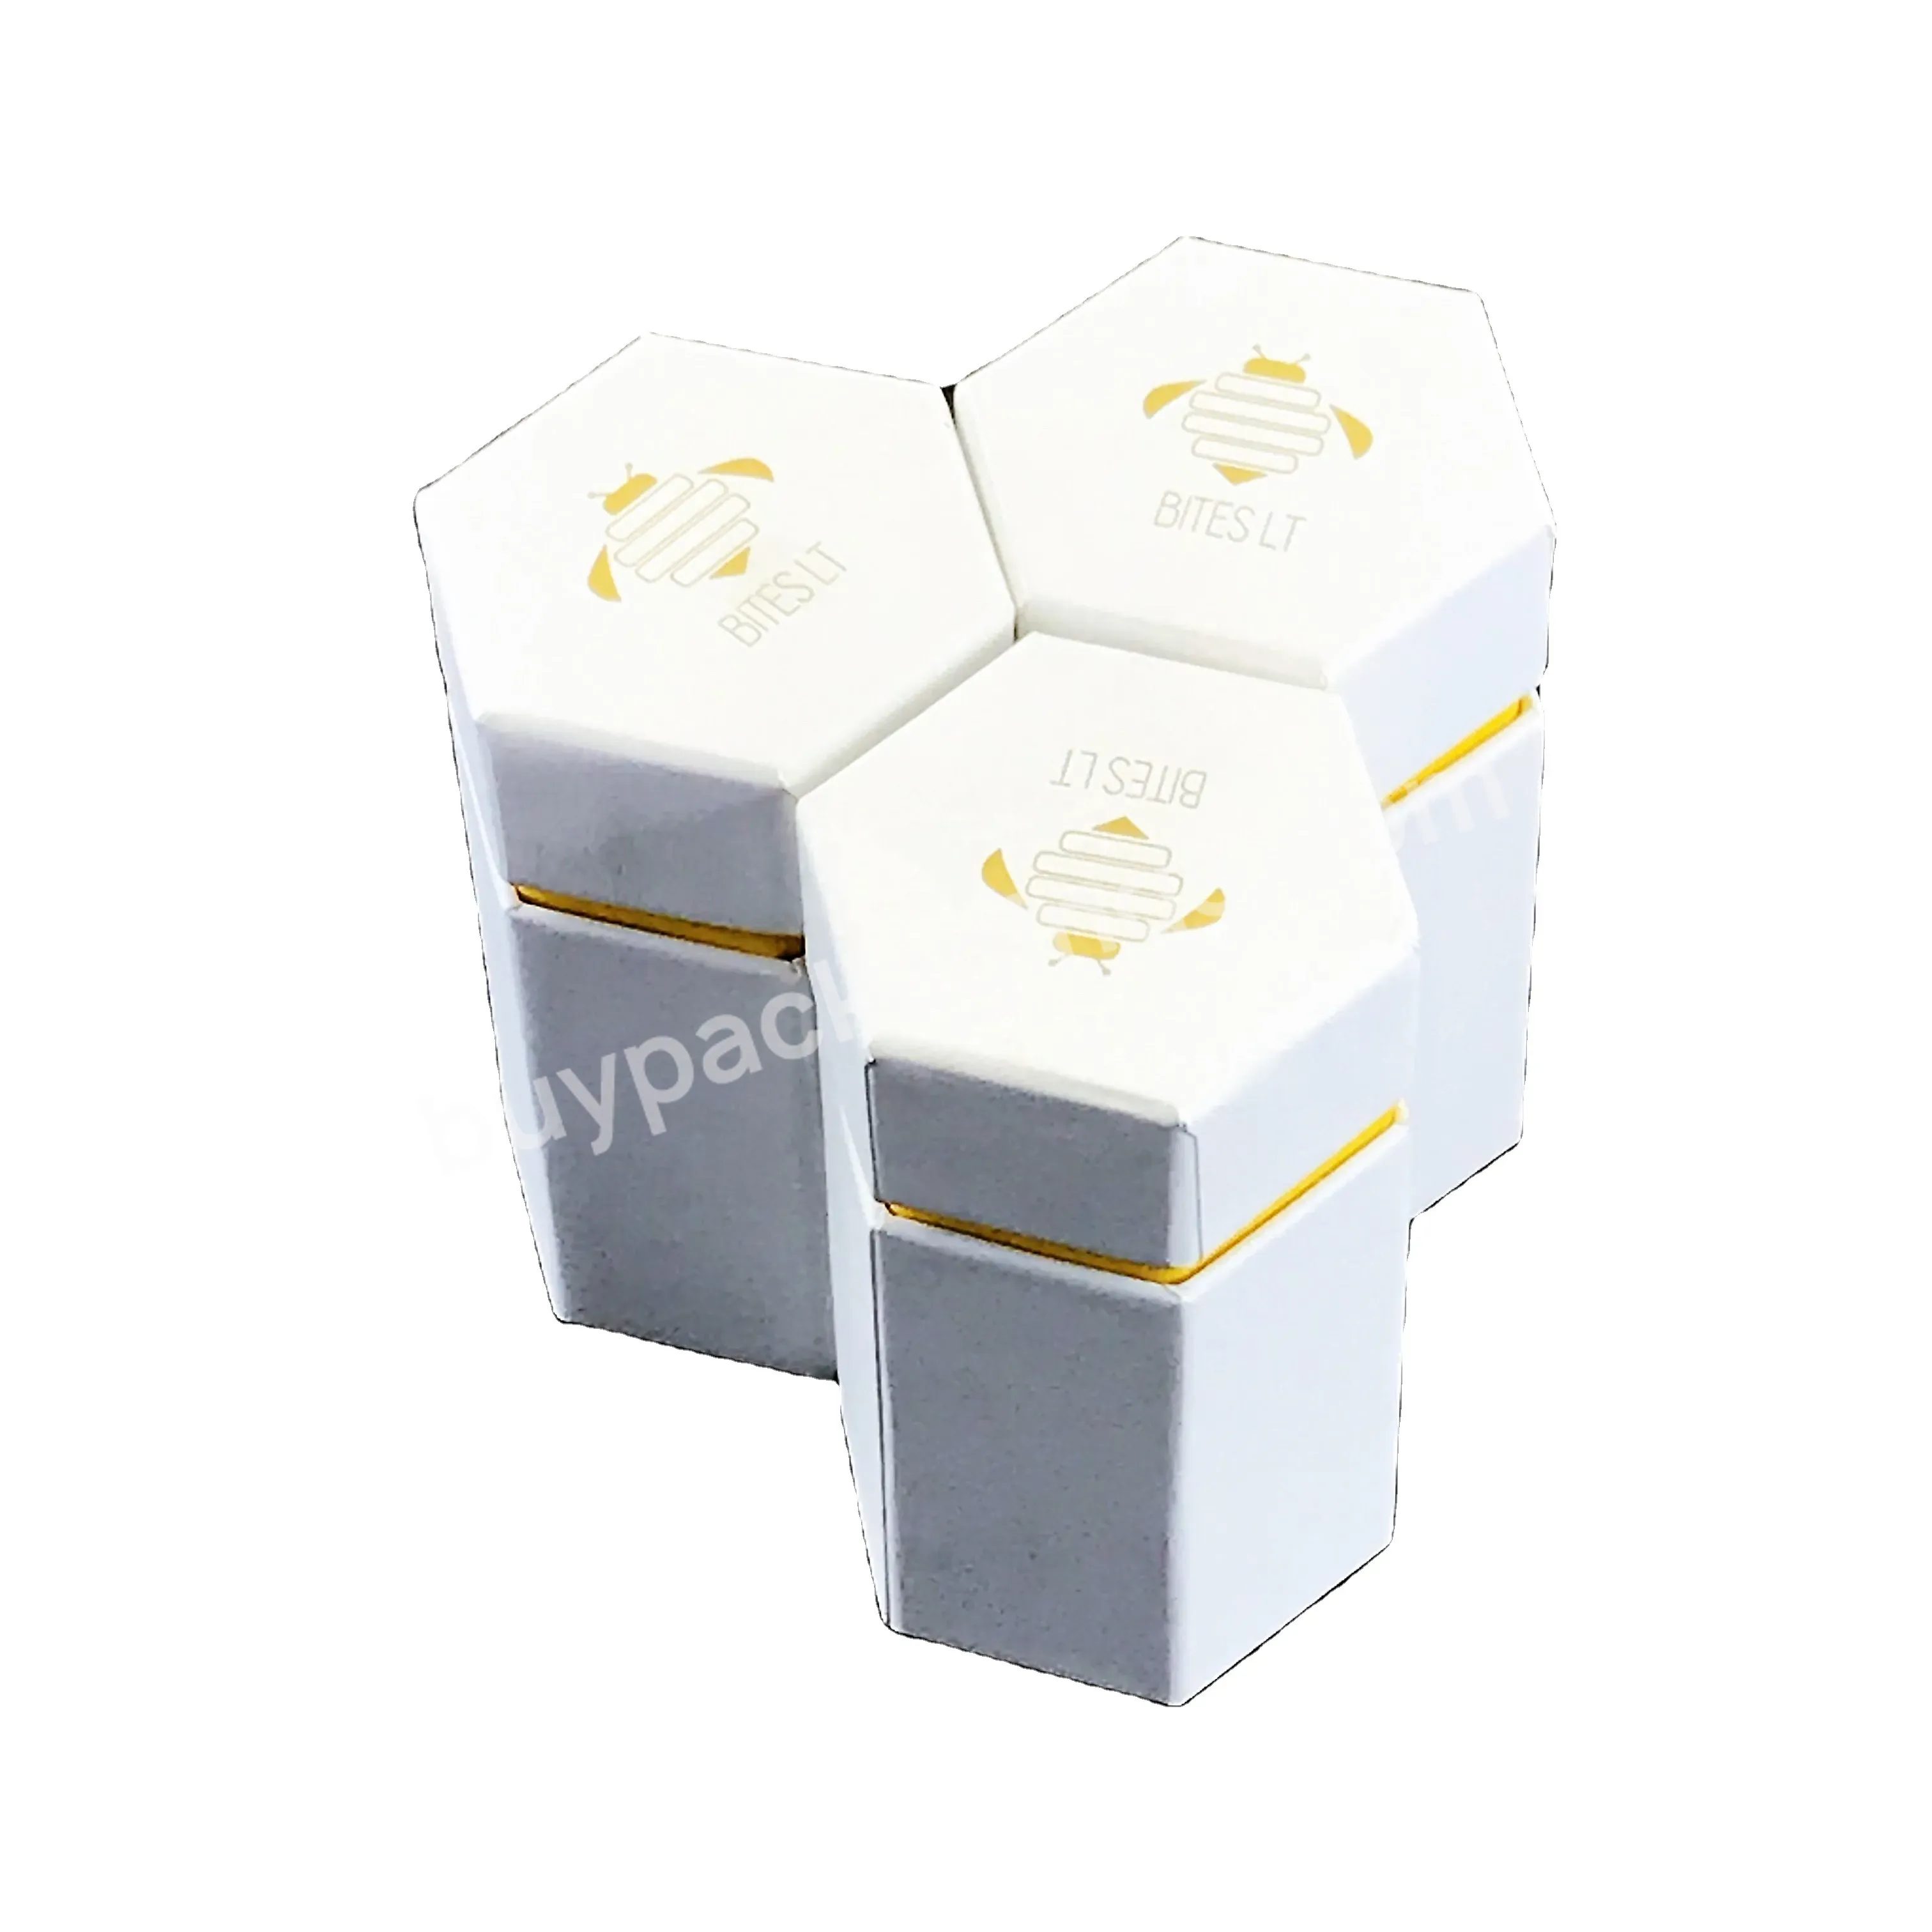 China Custom Logo Luxury Small White Hexagon Gift Box Cardboard Box With Glass Bottle For Food Packaging Box - Buy Food Packaging Box,Glass Bottle,Small White Hexagon Gift Box.